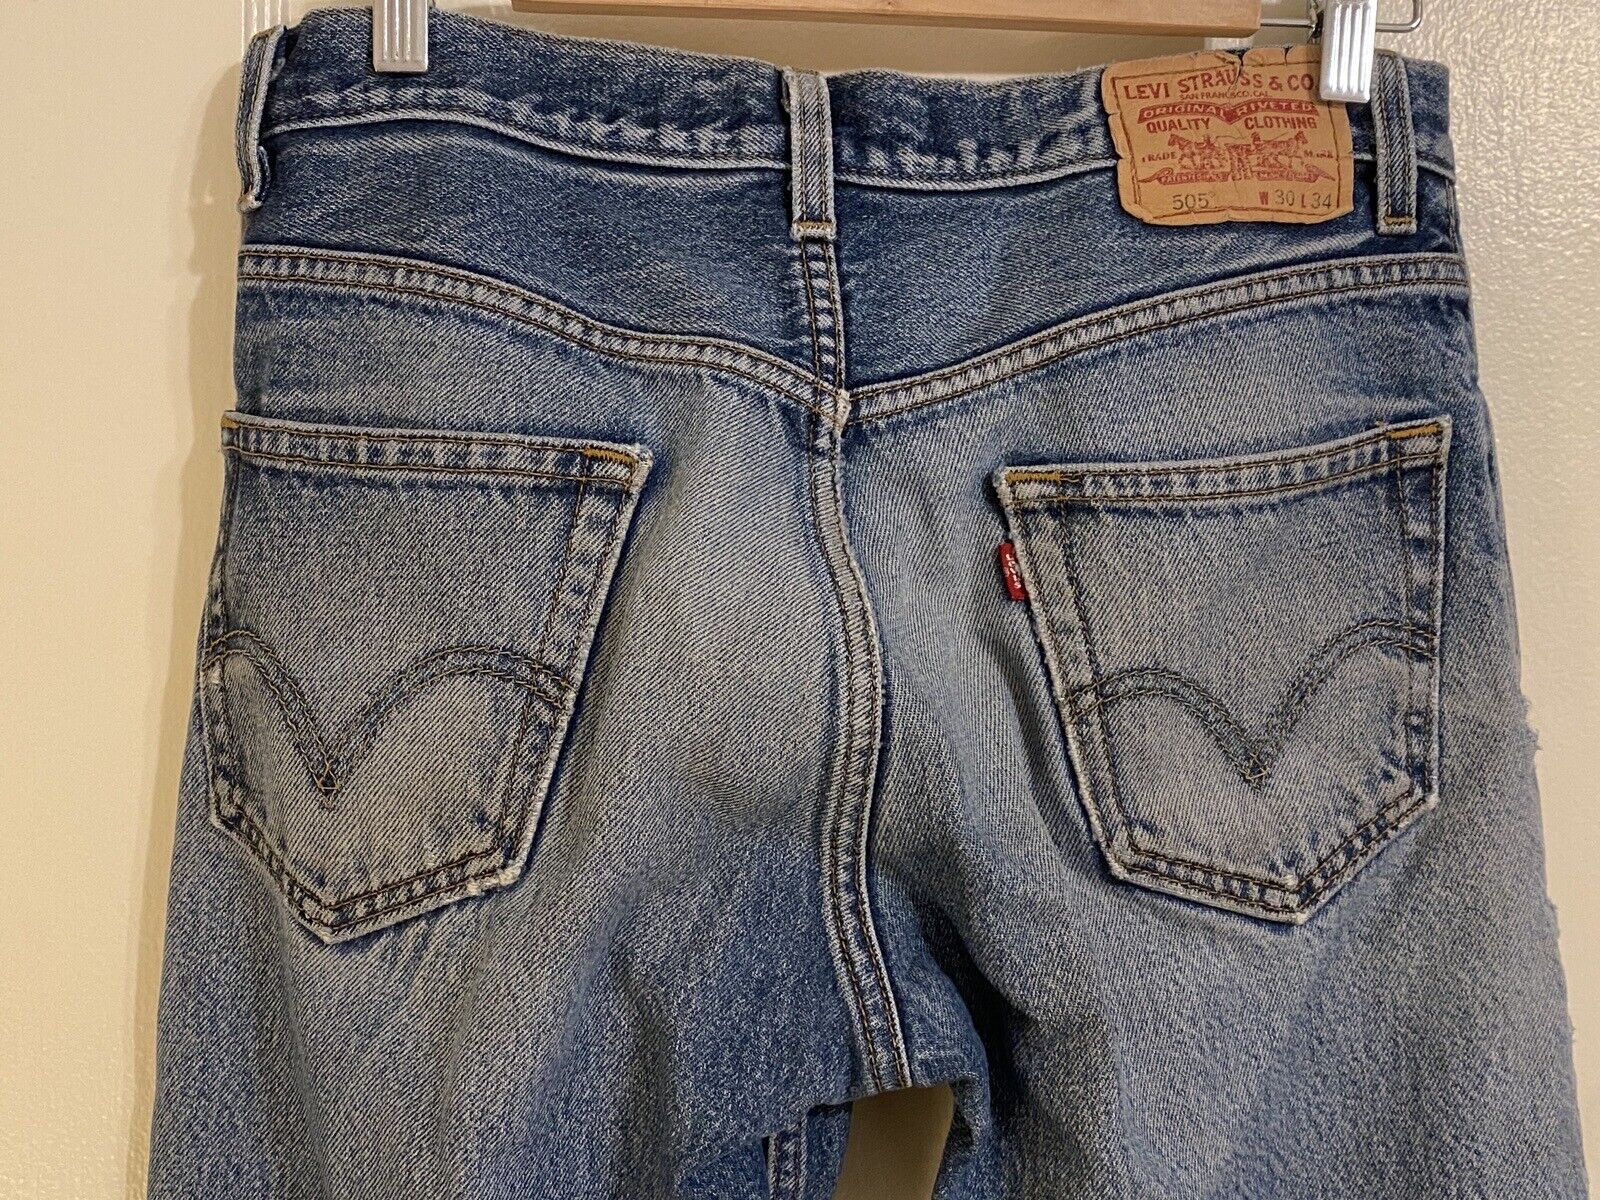 Levi’s 505 jeans USA￼ Red Tag Worn in Look - image 4